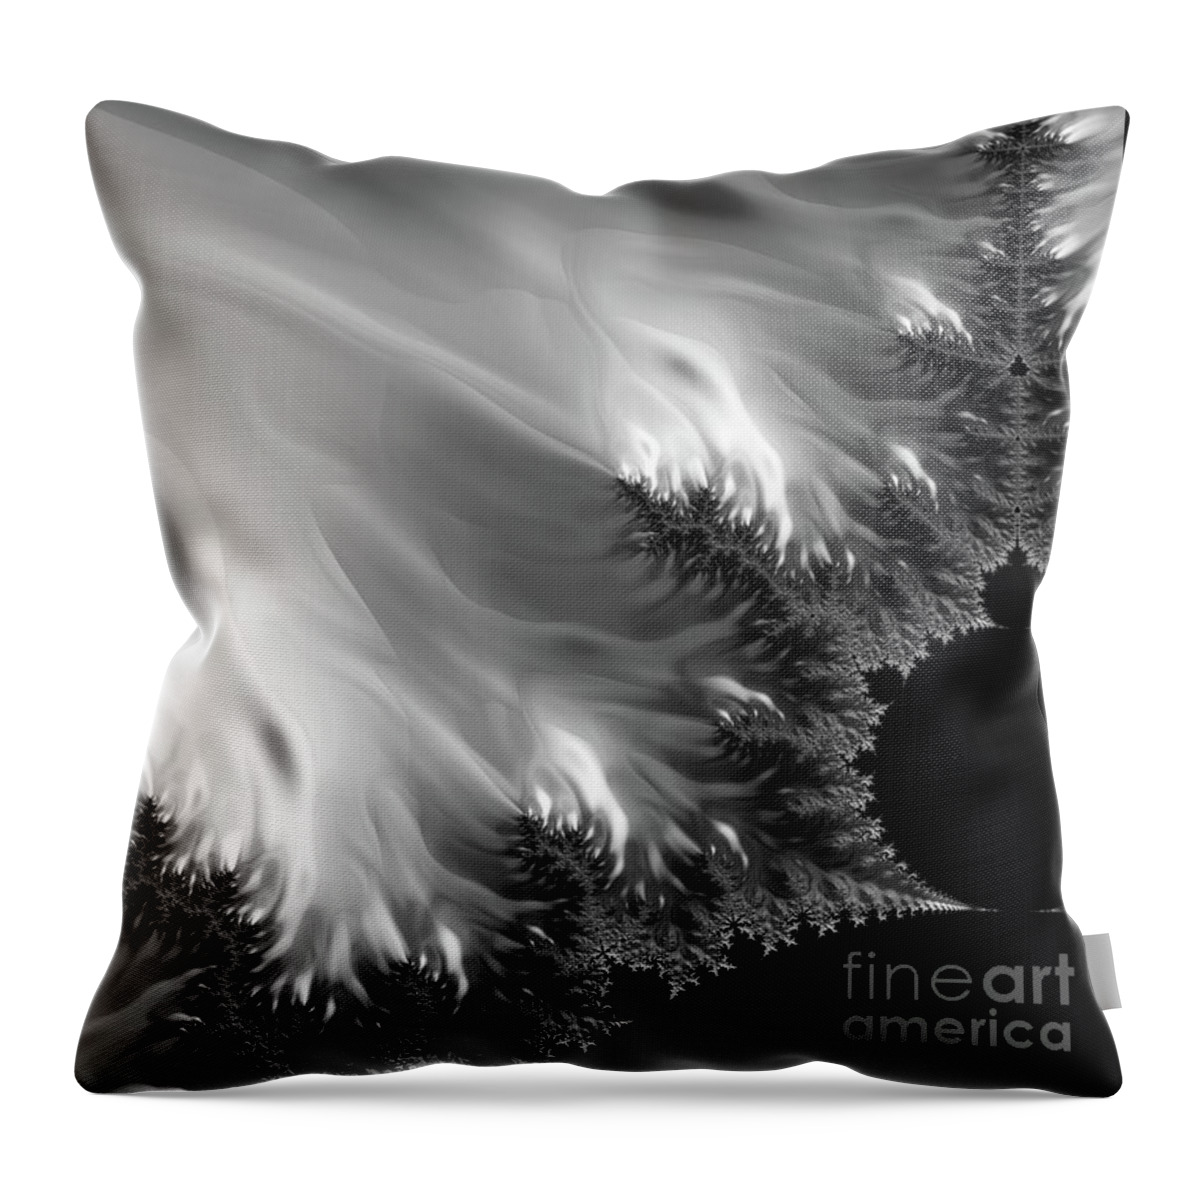 Strange Frequencies Throw Pillow featuring the digital art Strange Frequencies by Elizabeth McTaggart